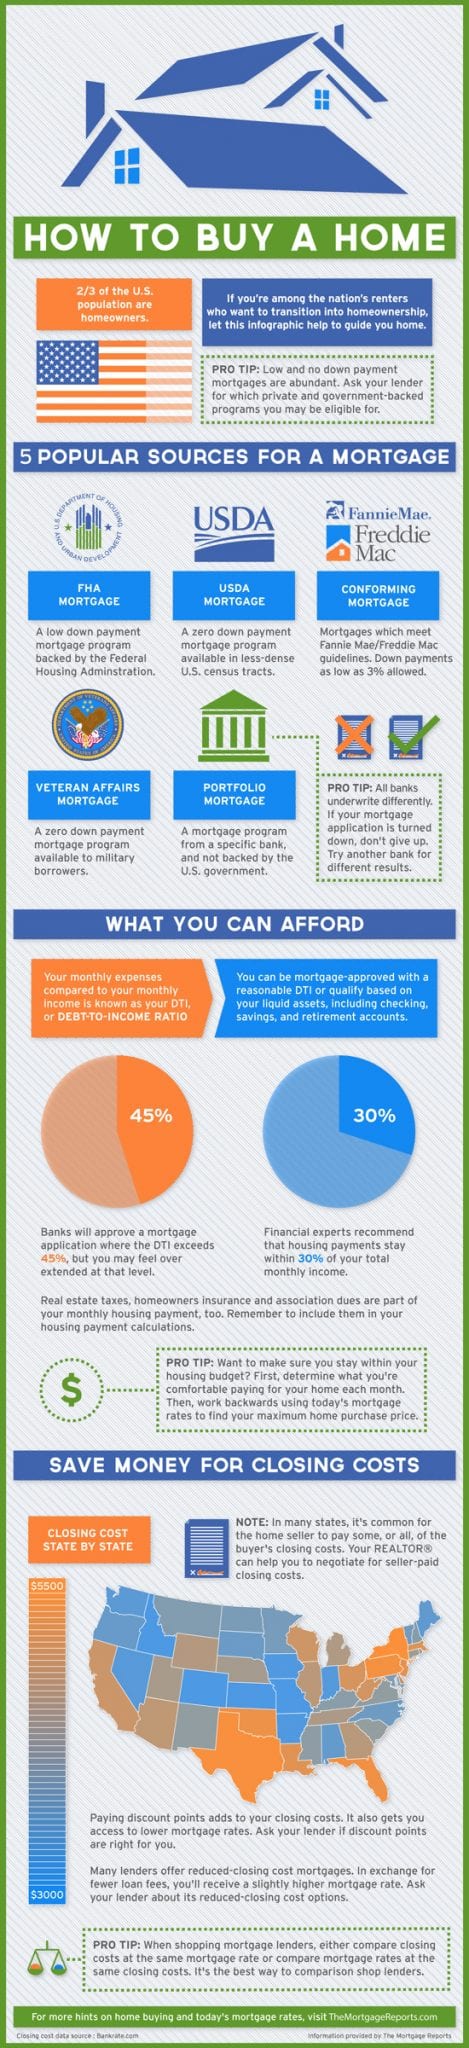 How To Buy A Home : Infographic from The Mortgage Reports